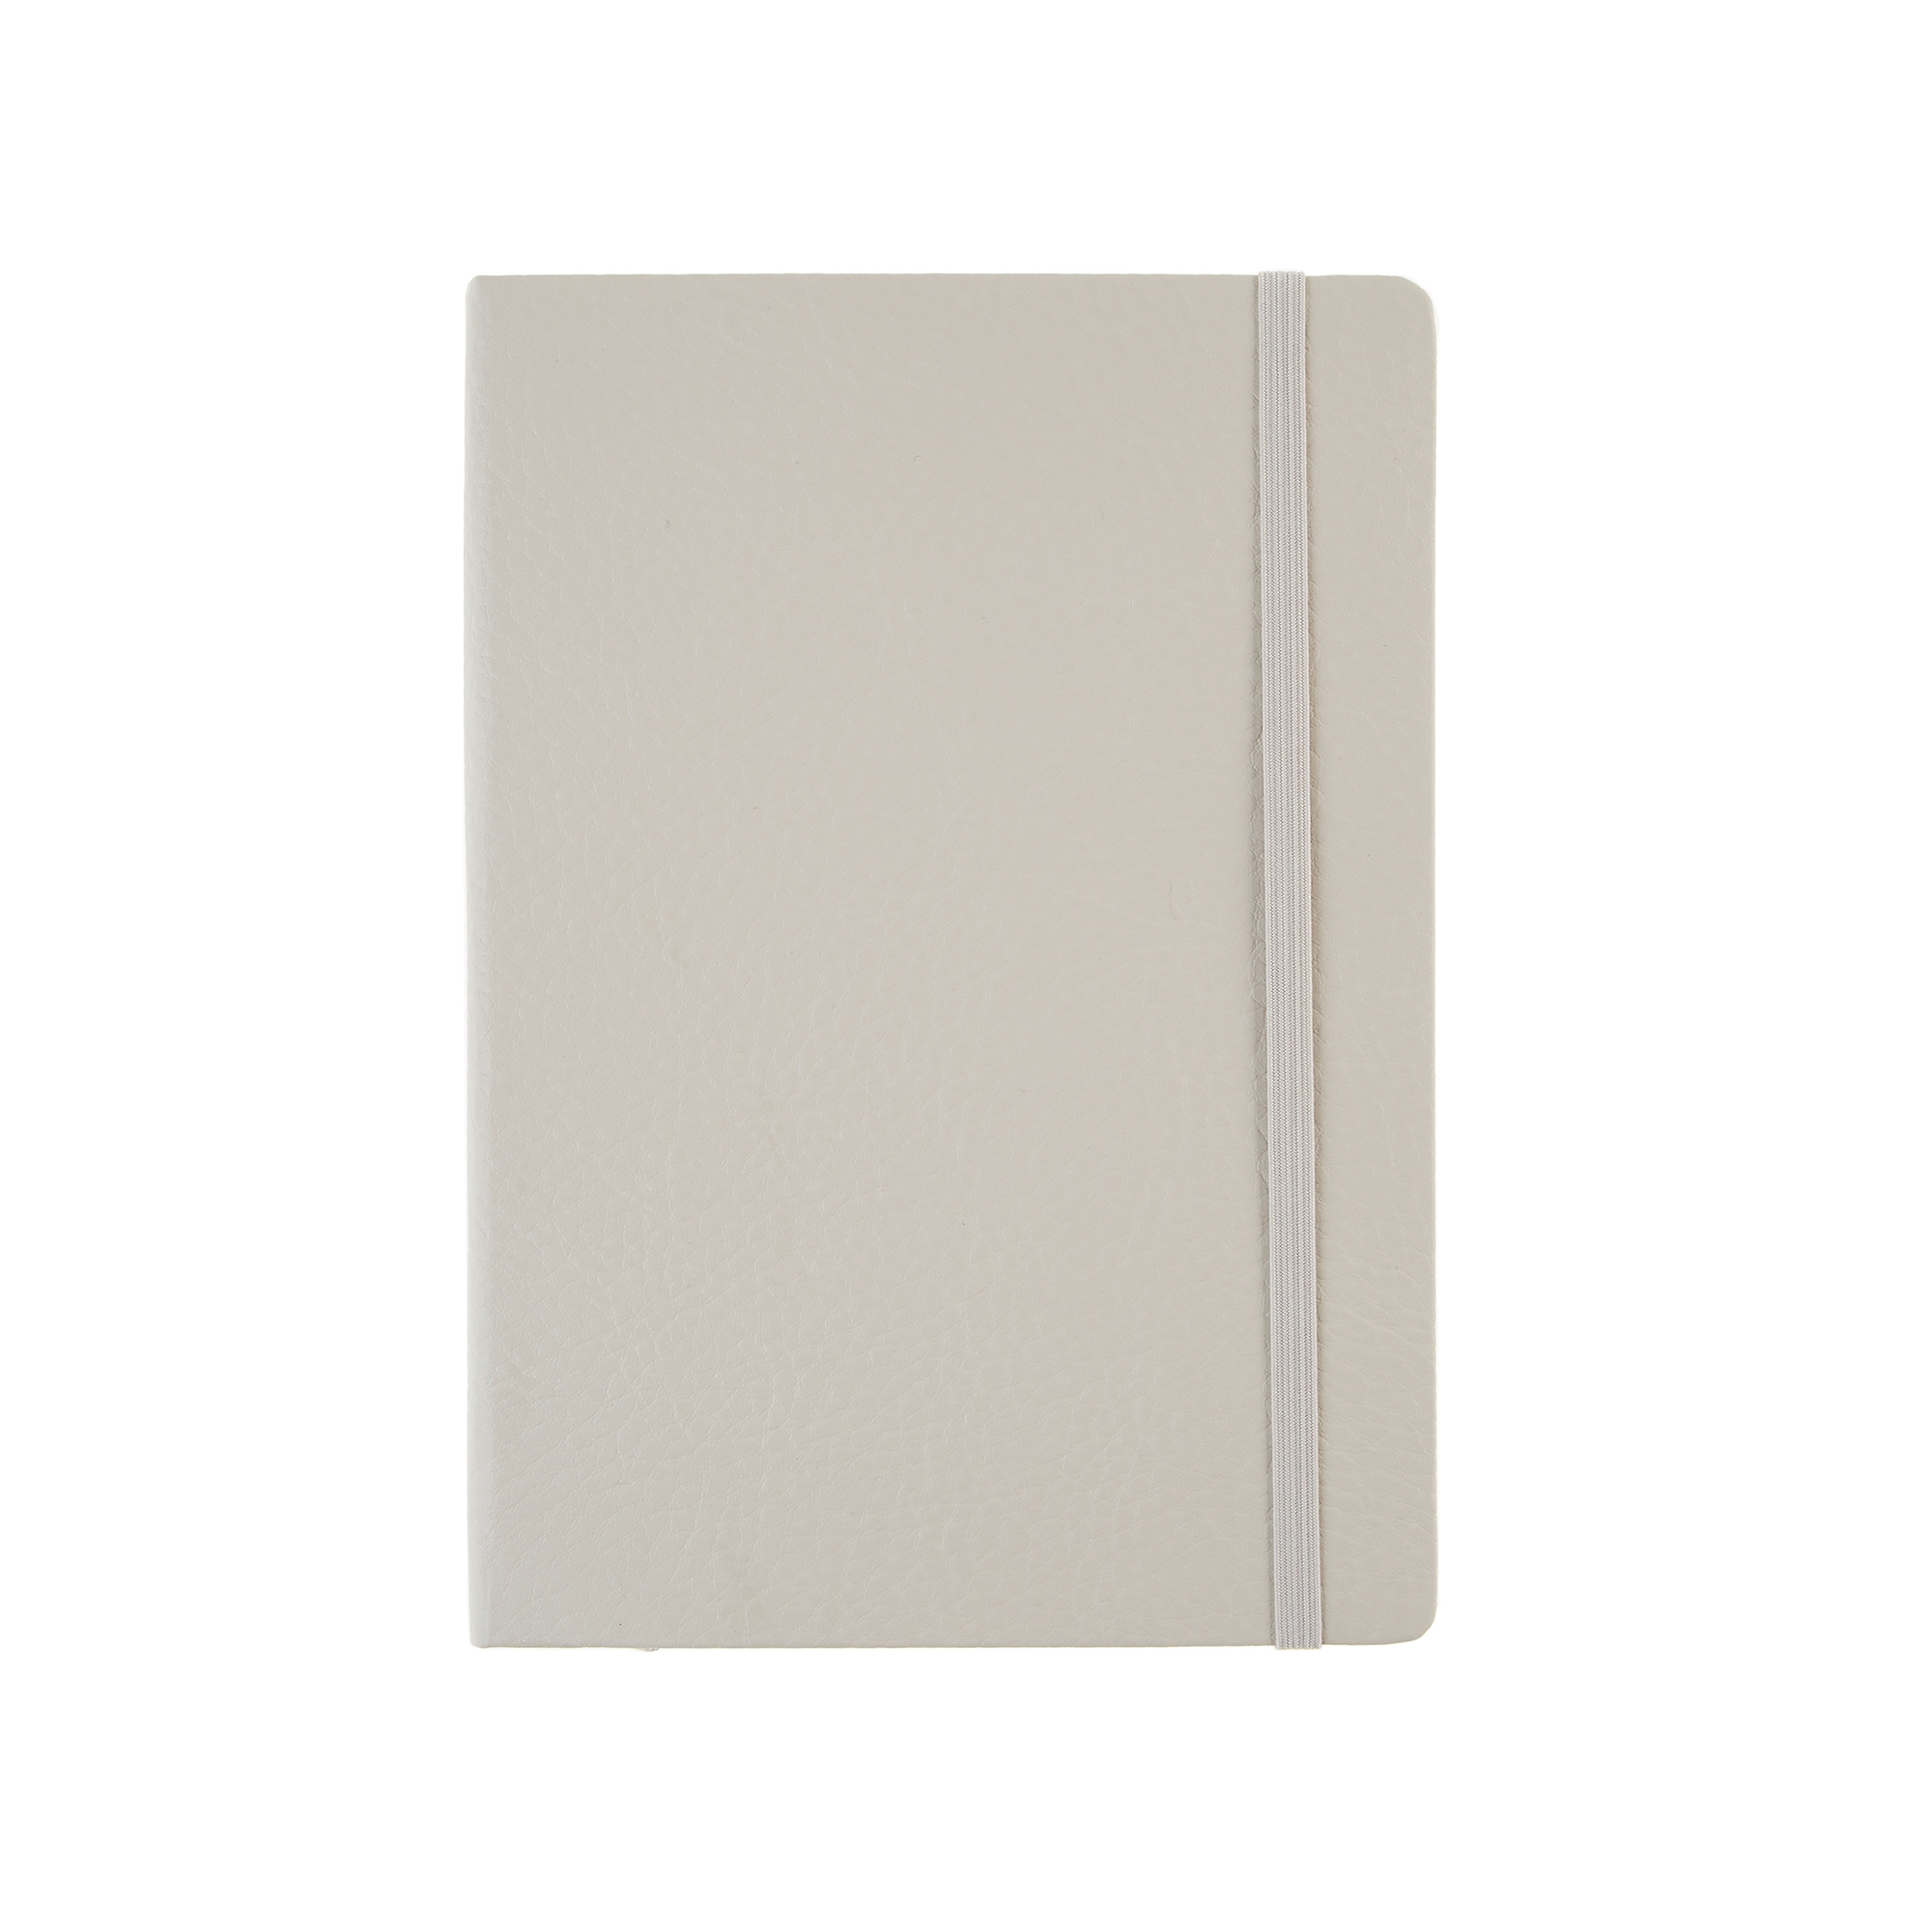 Collins B6 Ruled Notebook - Grey